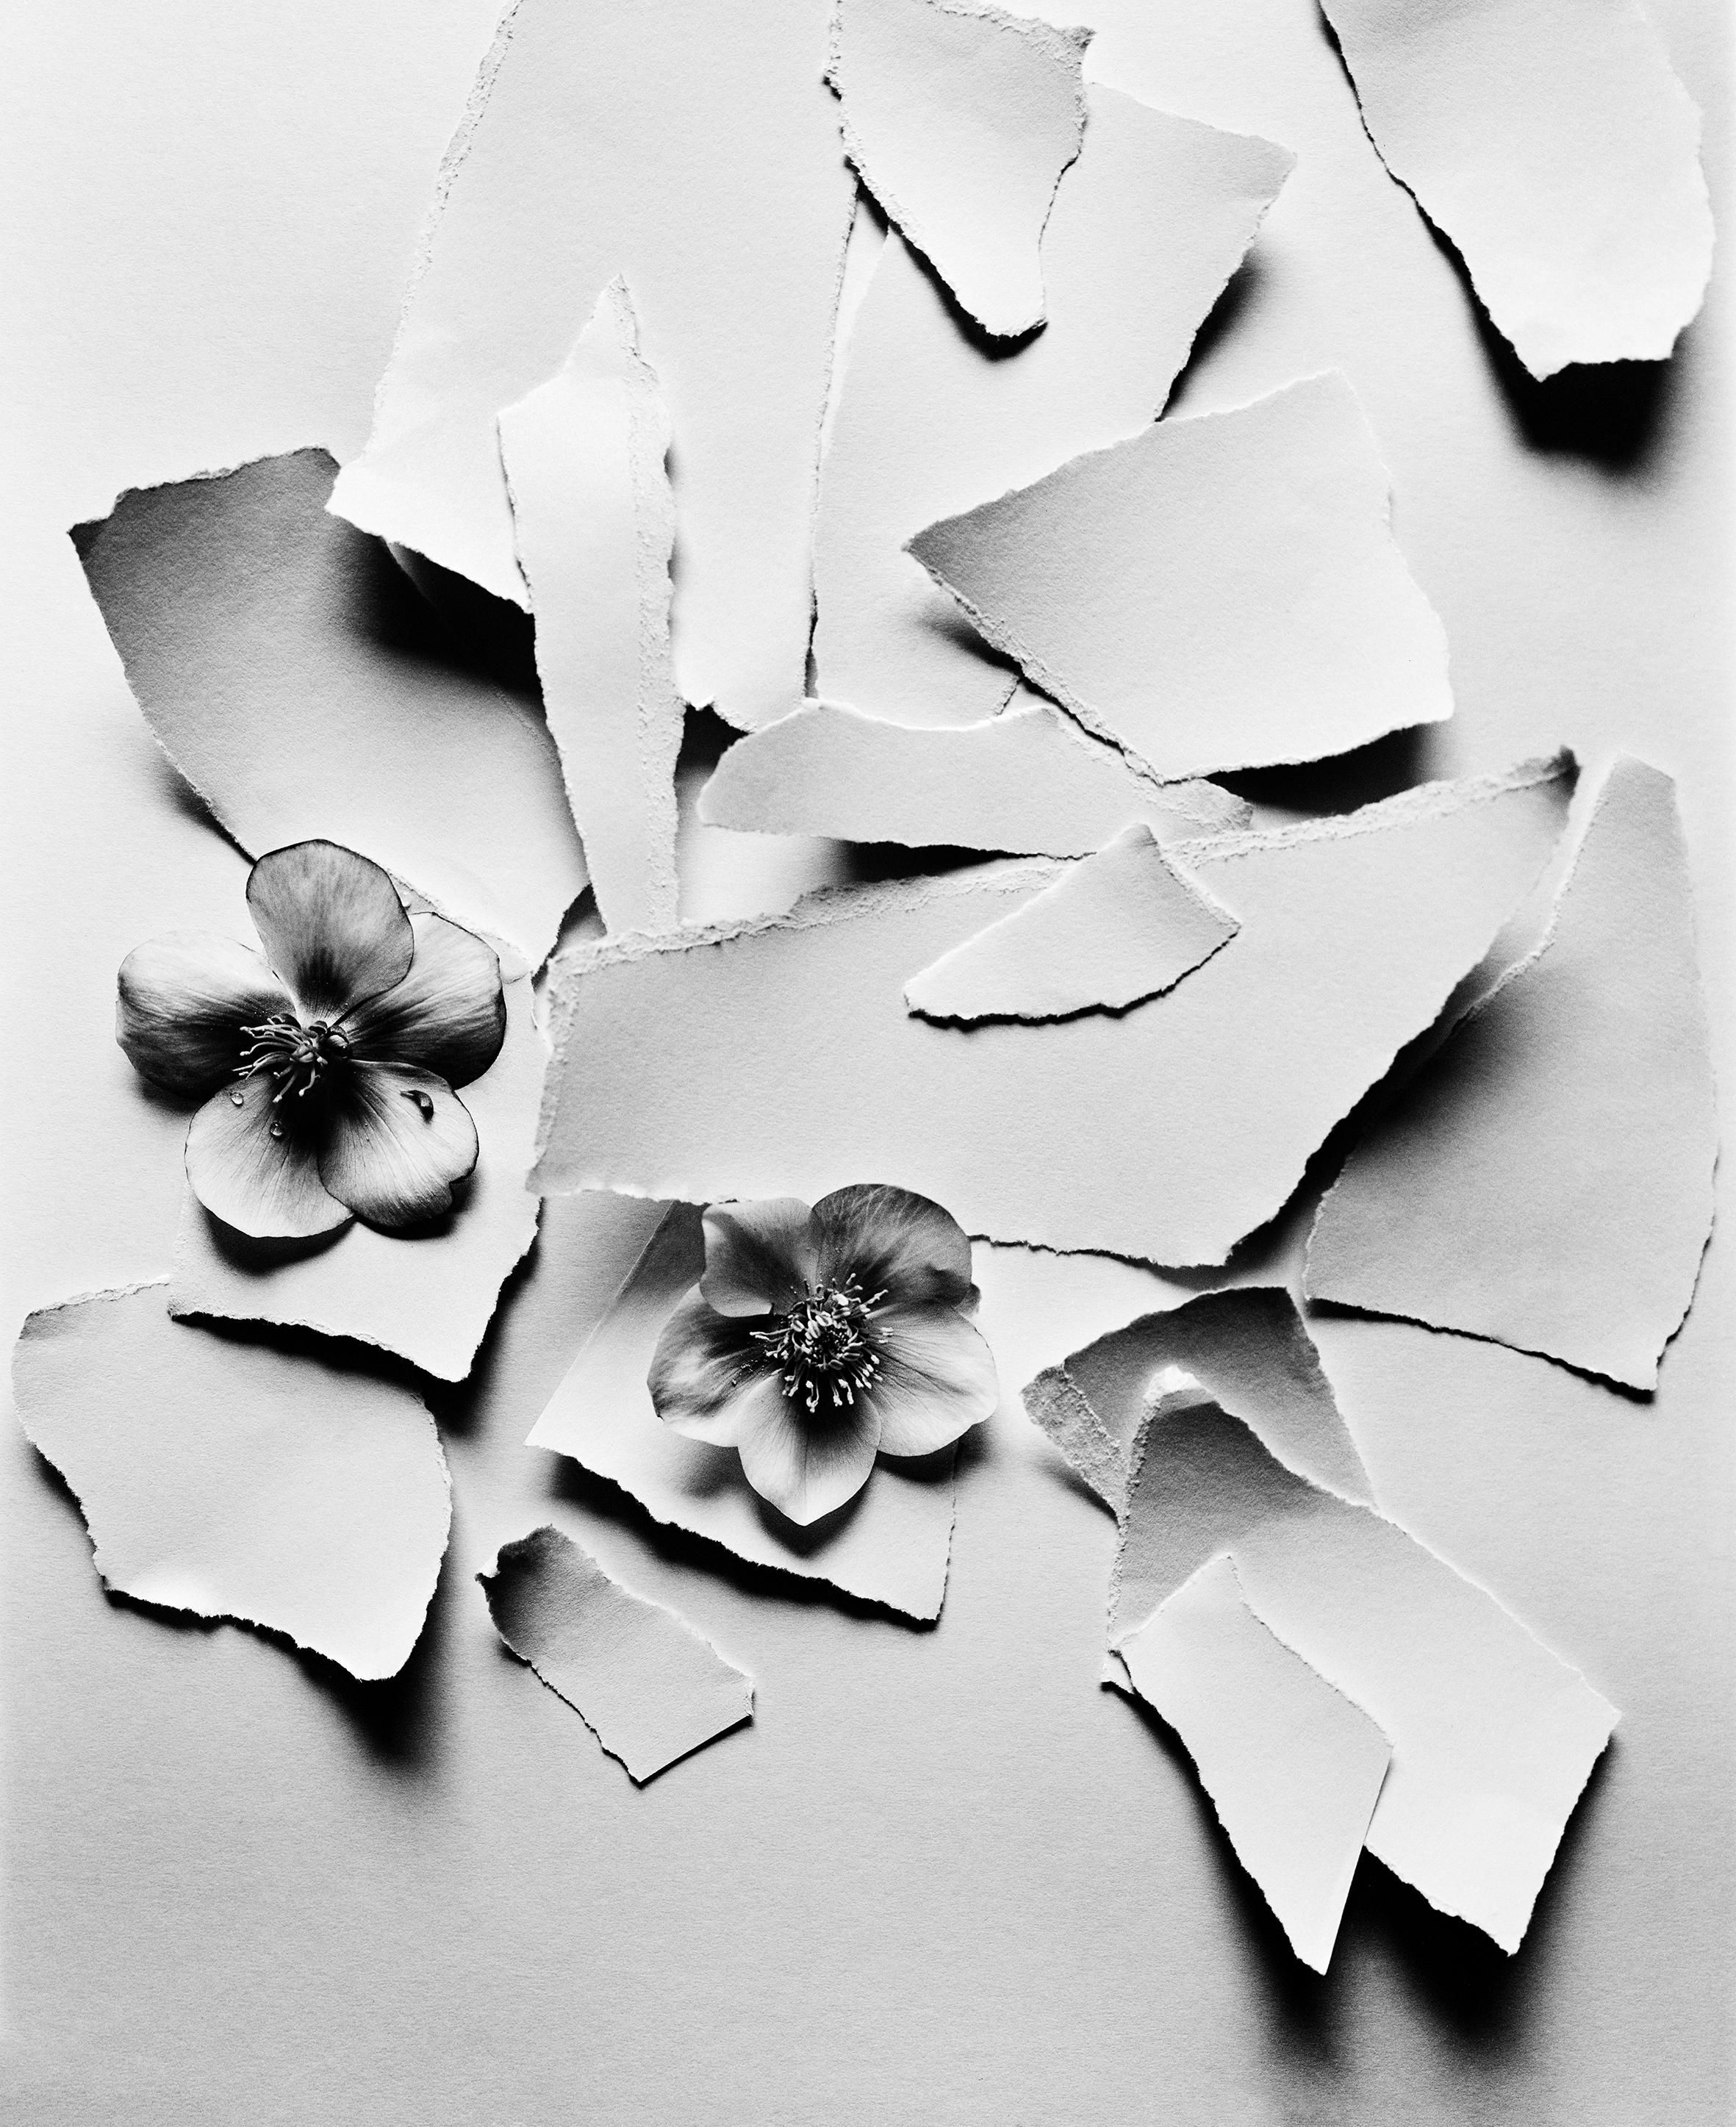 Ugne Pouwell Black and White Photograph - Black Hellebore - analogue black and white floral photography